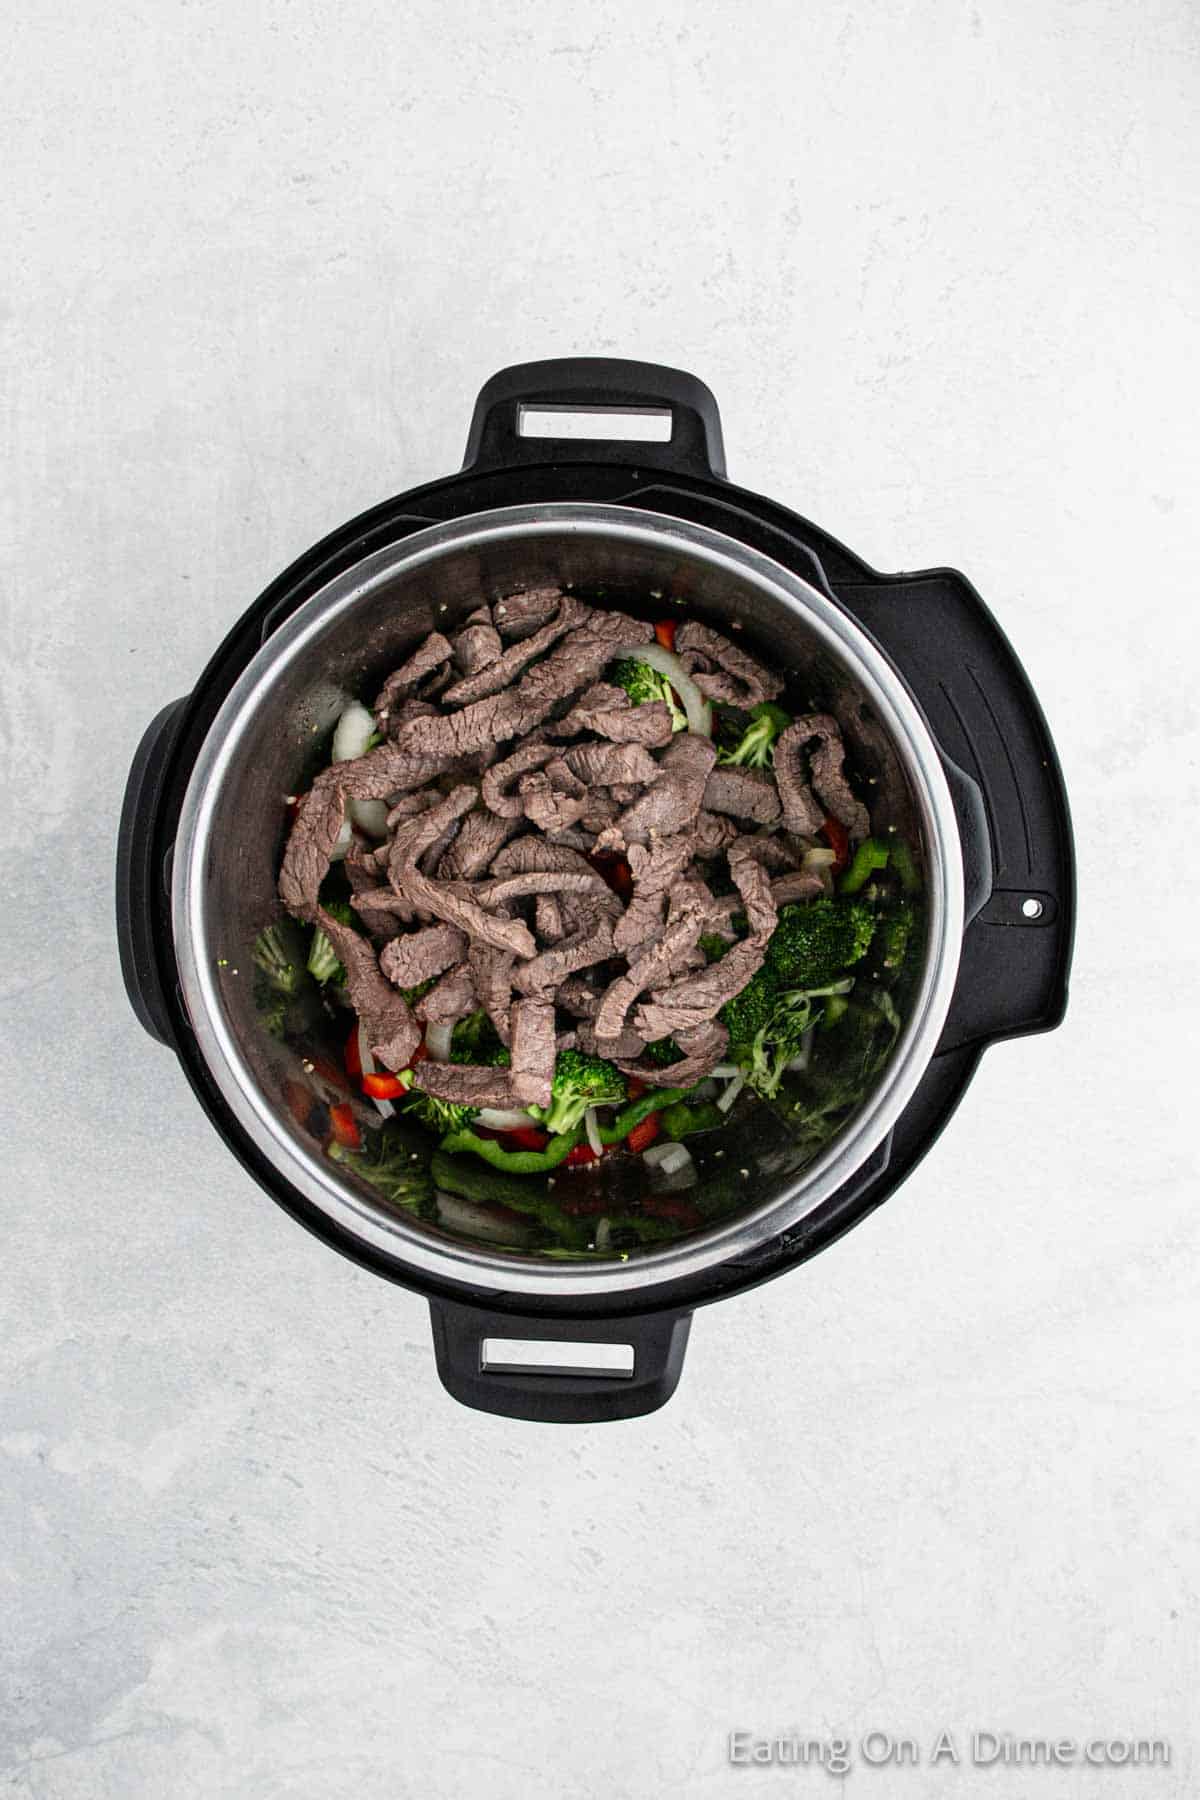 Cooked strips of beef in the instant pot on vegetables